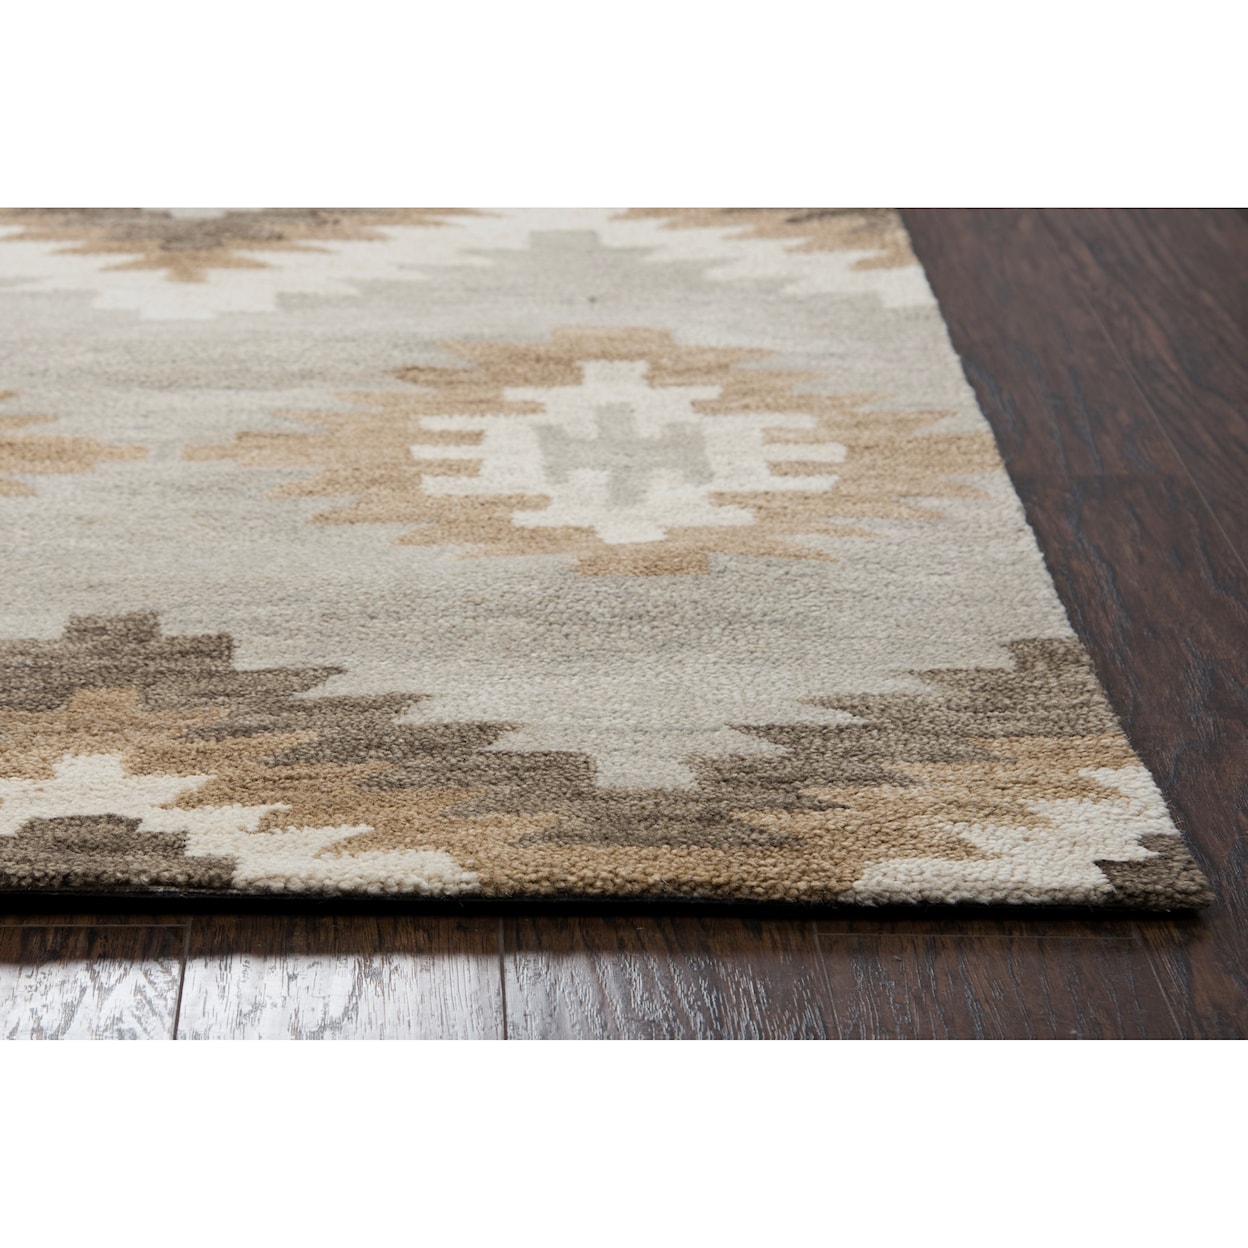 Rizzy Home Leone 12' x 15' Rectangle Rug